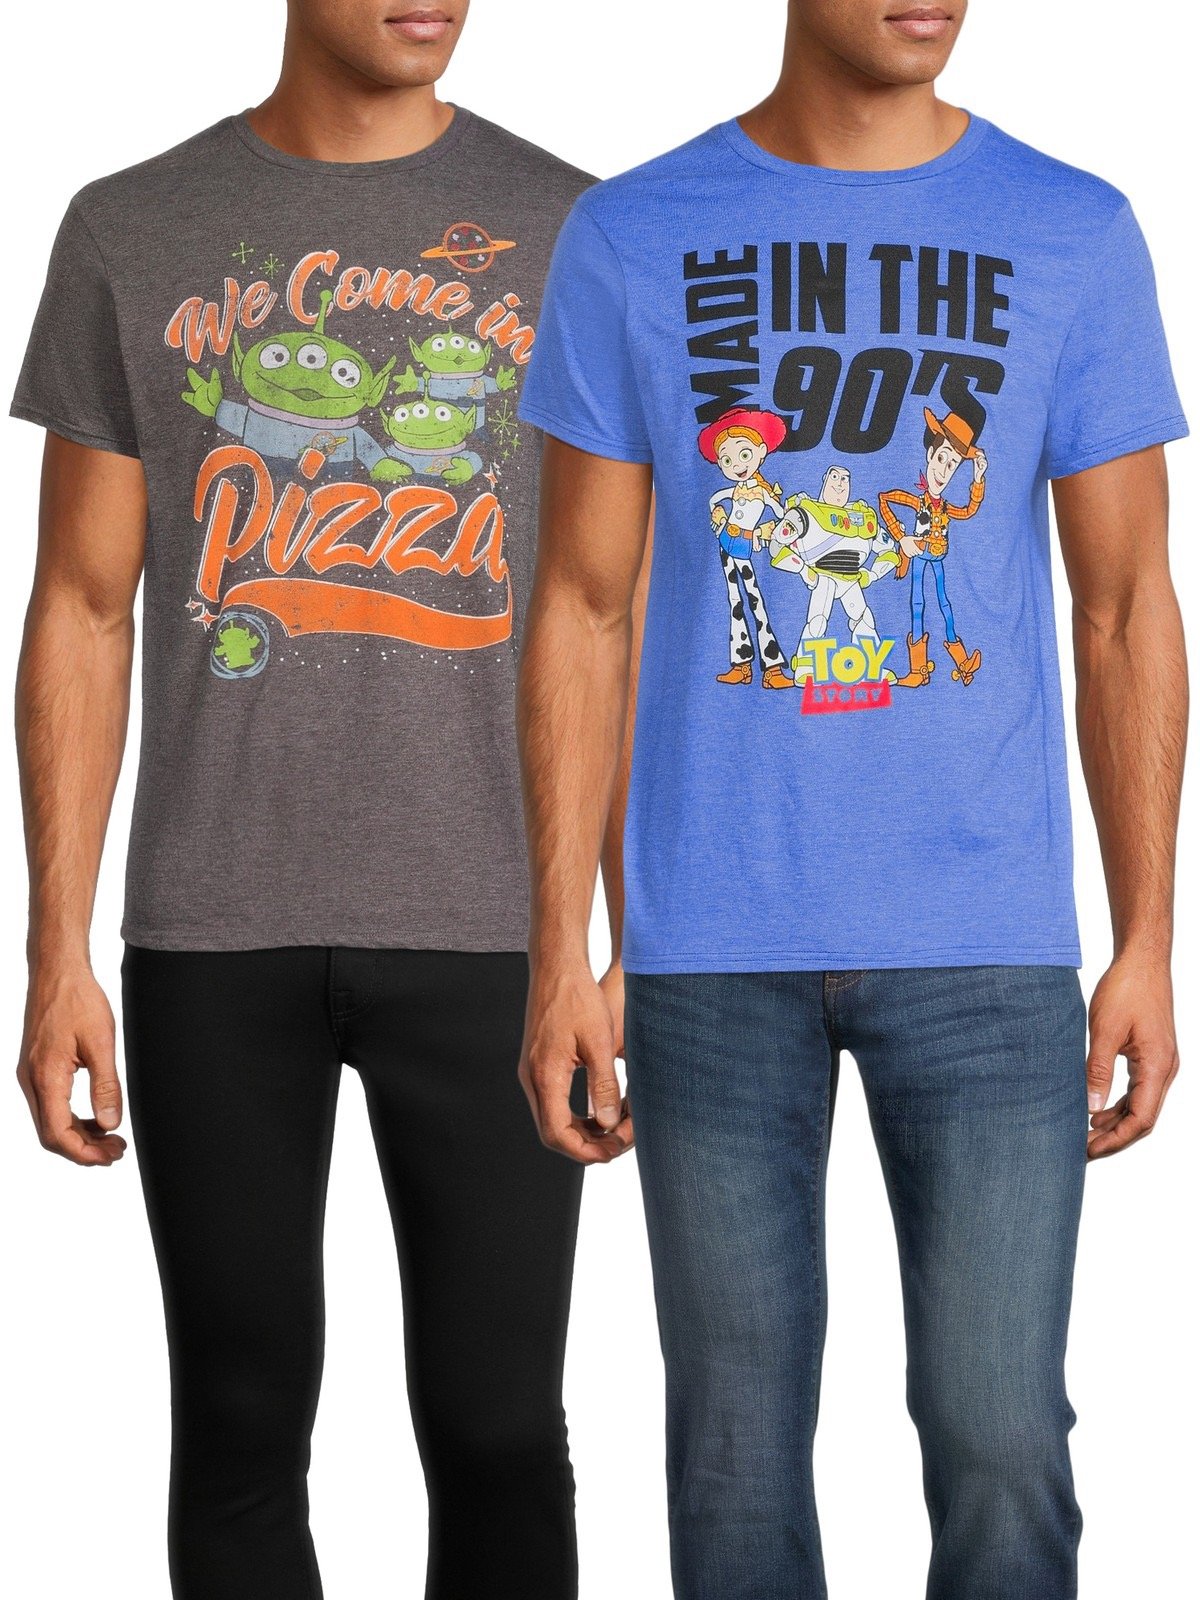 Toy story shirts